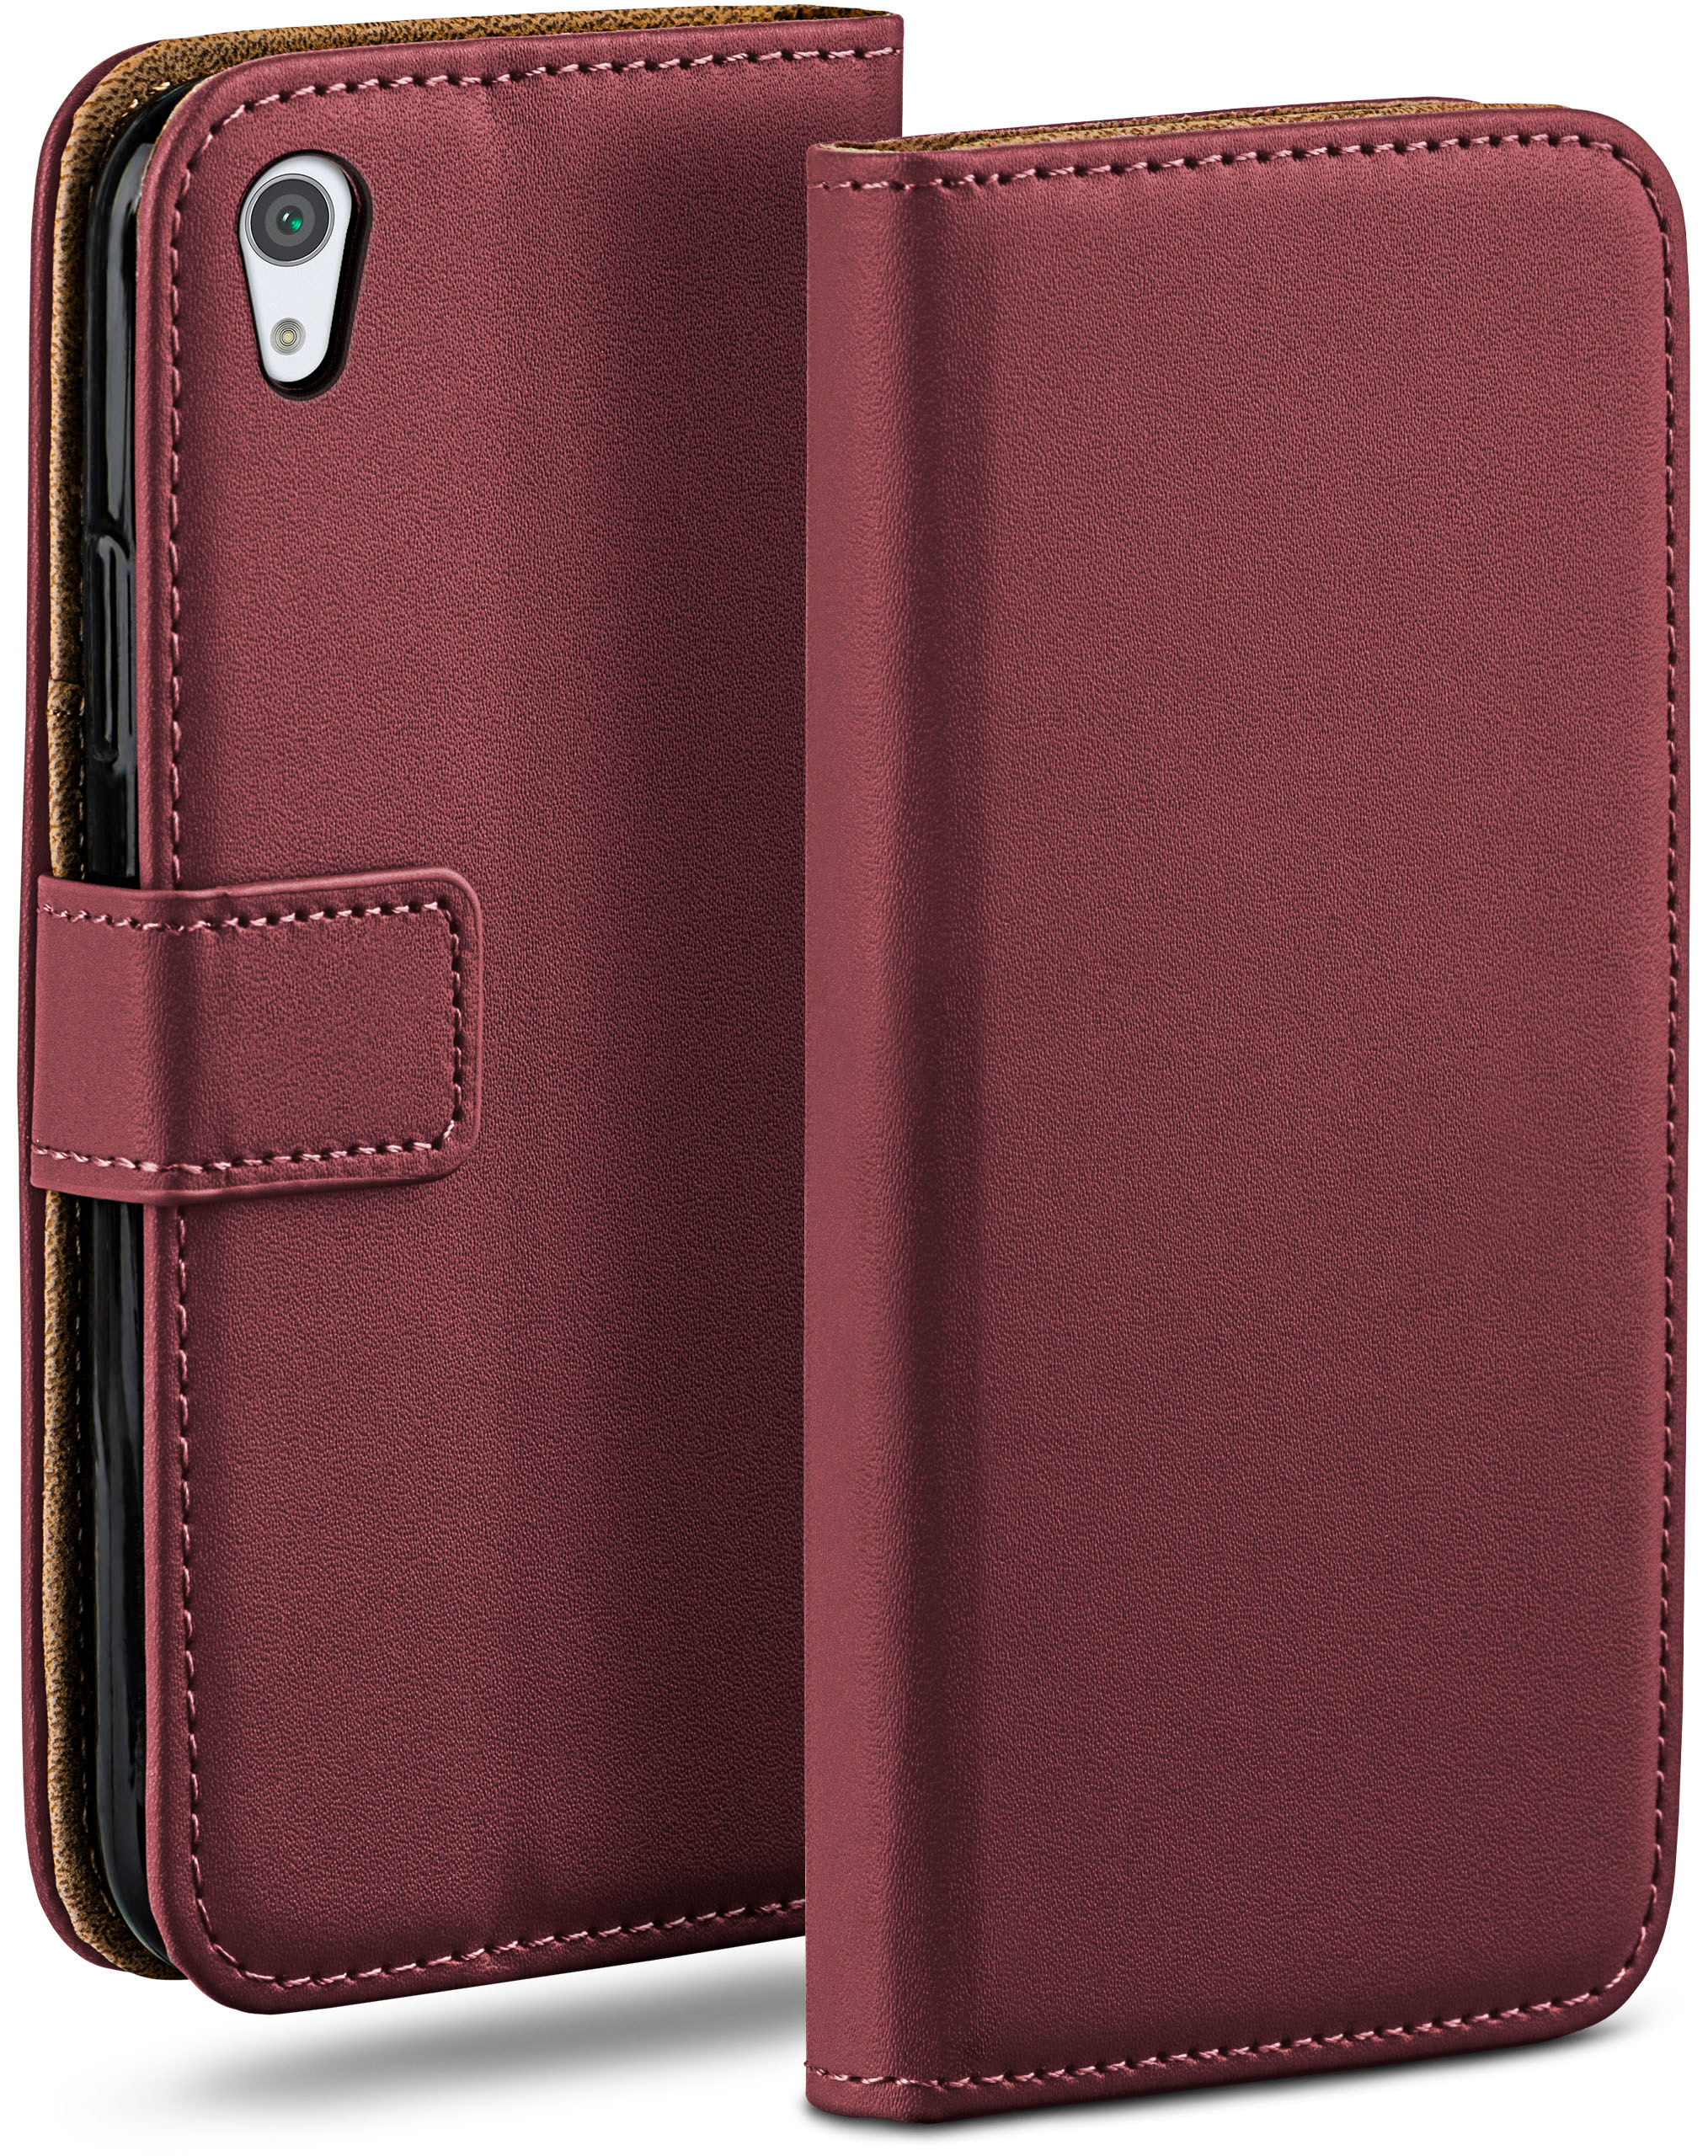 MOEX Book Case, Sony, Maroon-Red Bookcover, Xperia XA1